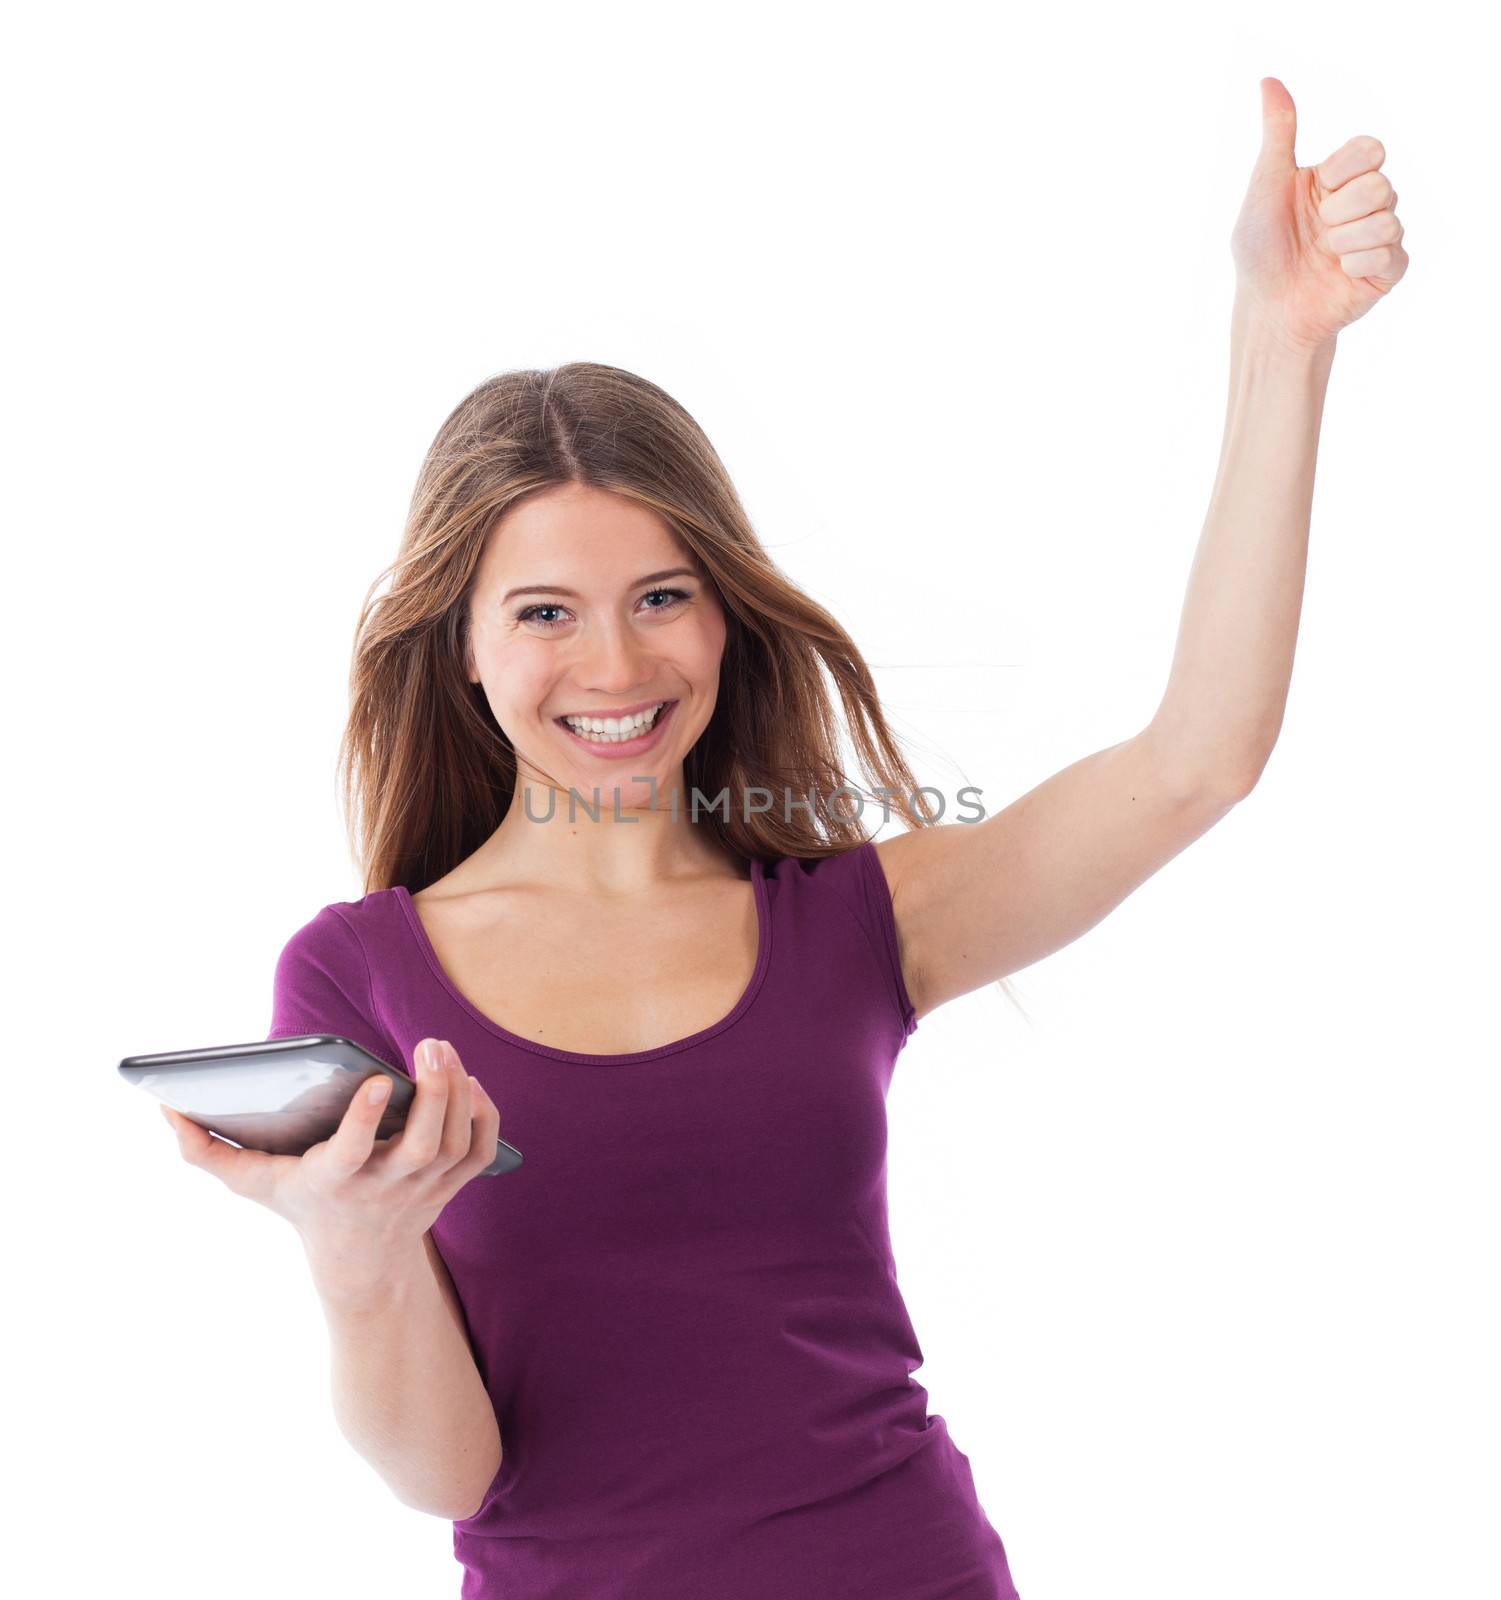 Very happy woman holding a touchpad by TristanBM